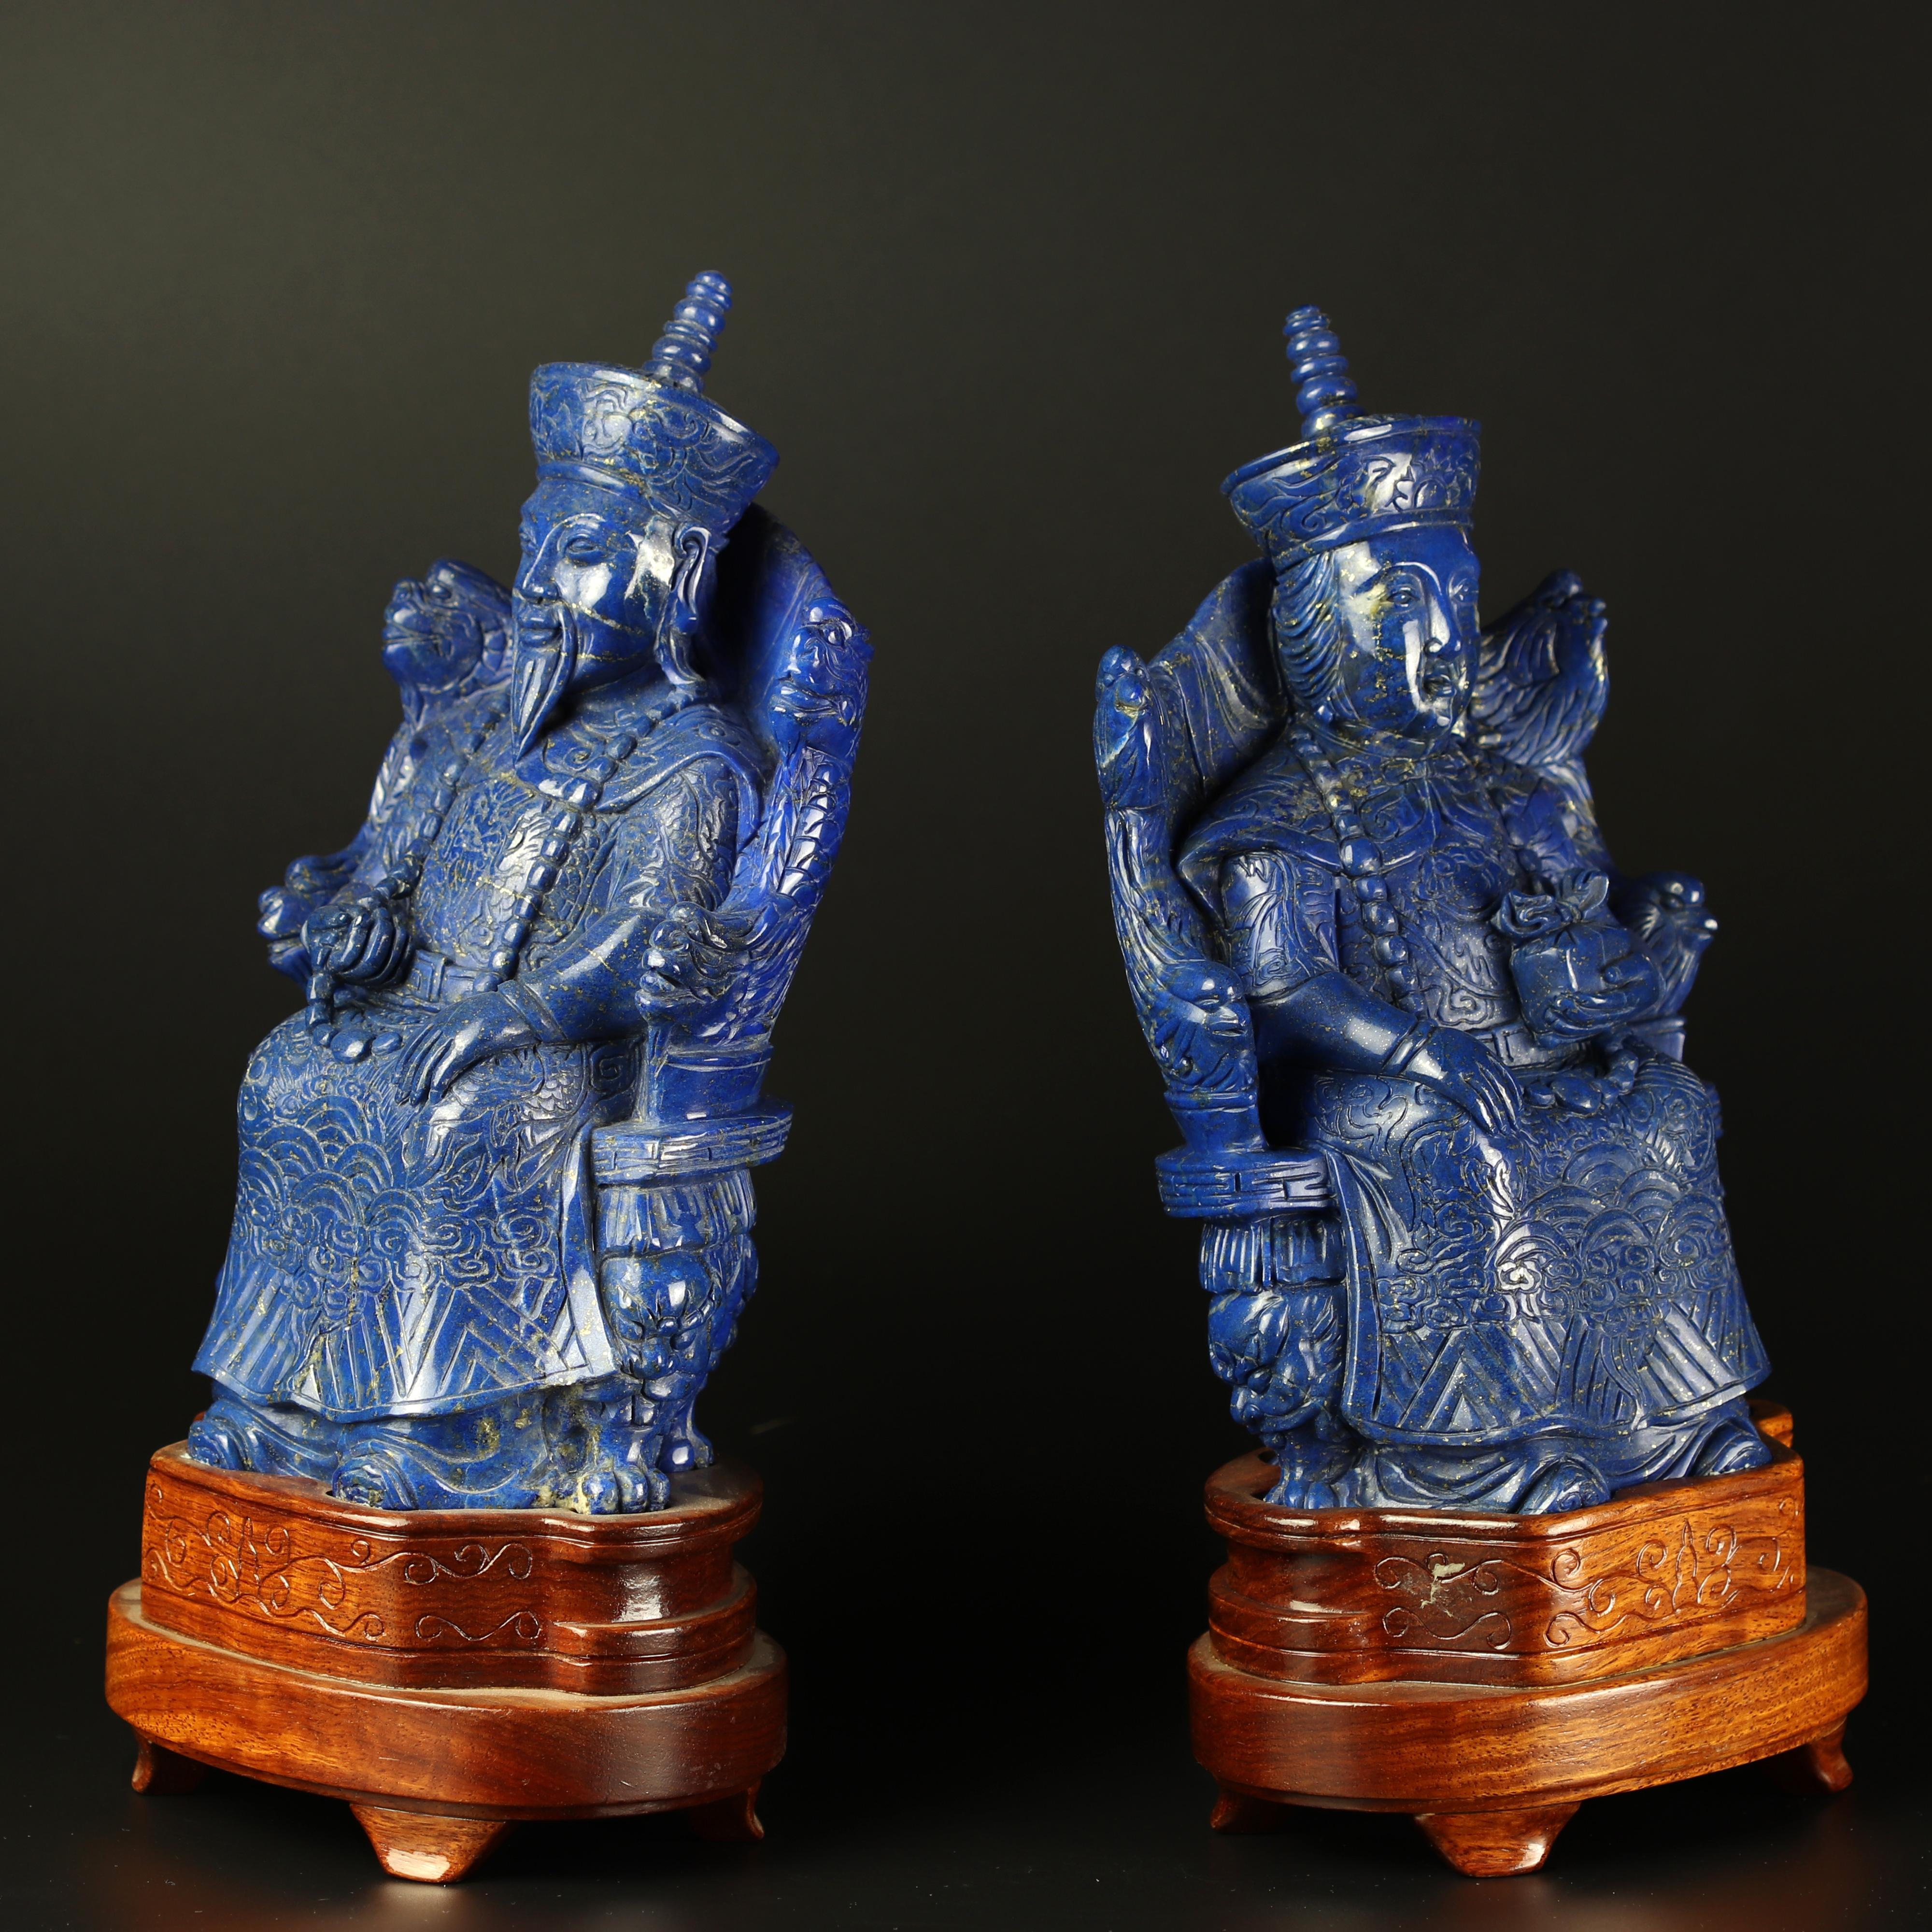 Lapis Lazuli King Queen Carved Blue Gemstone Artisanal Royalty Statue Sculpture For Sale 1